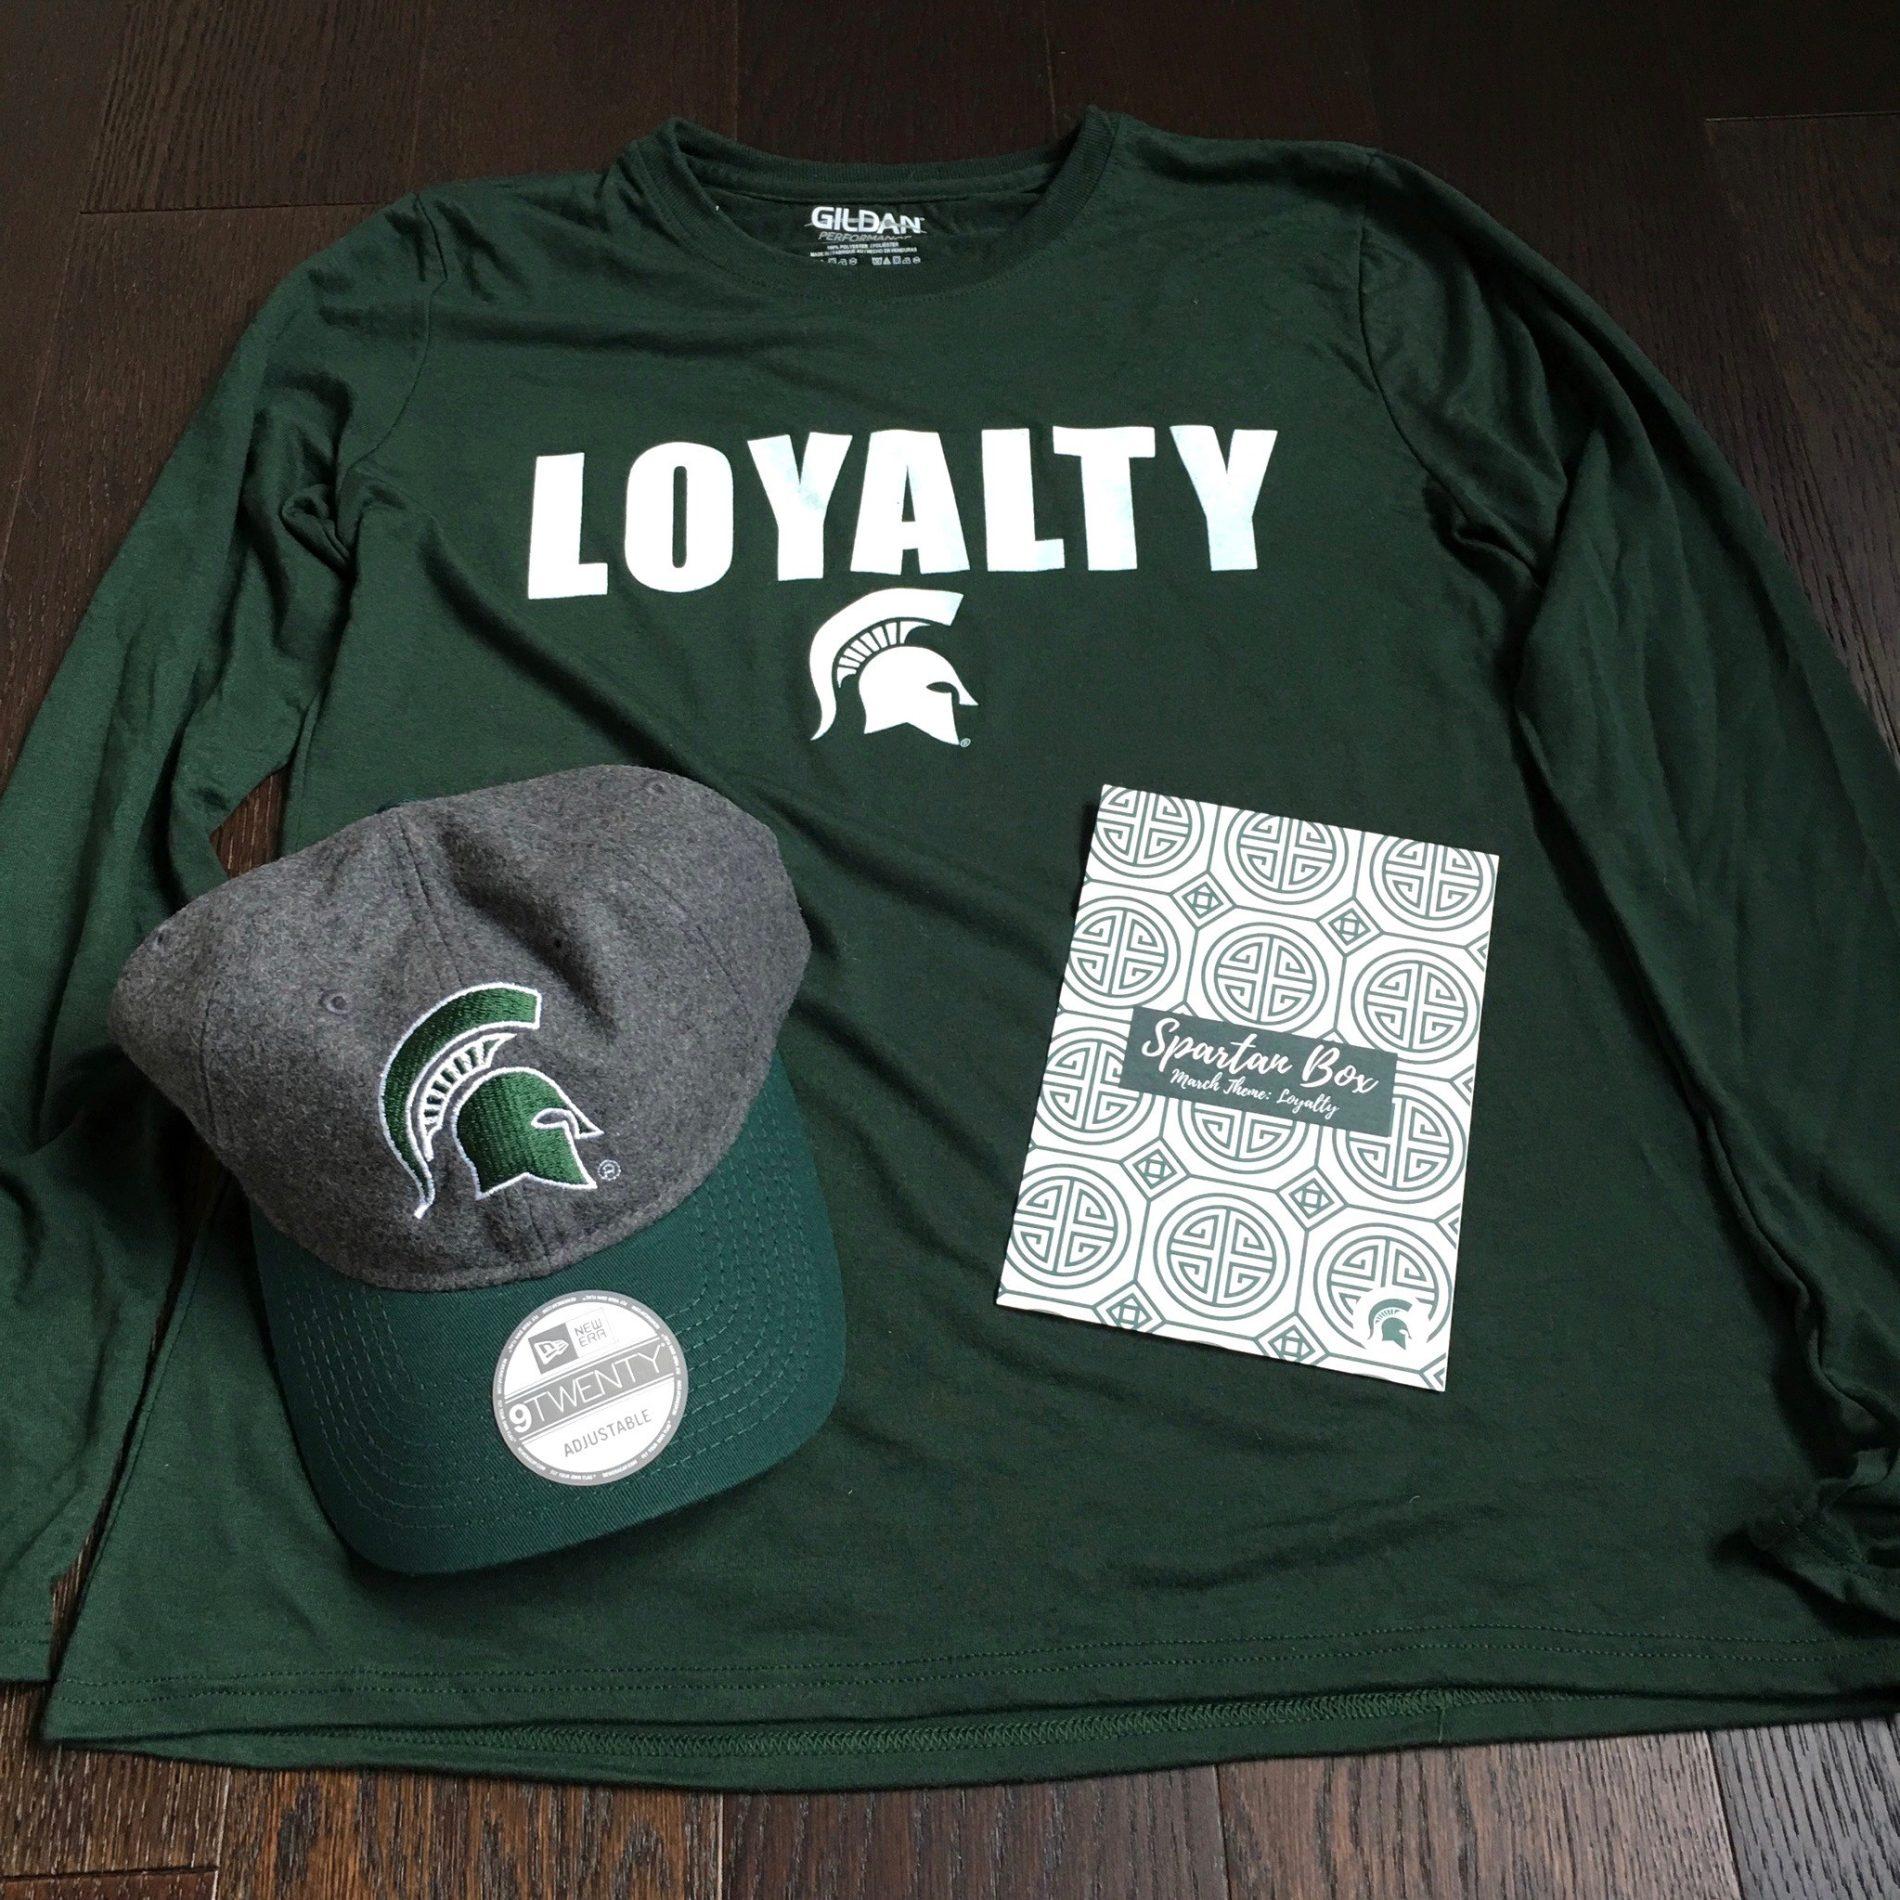 Read more about the article Spartan Box Michigan State Subscription Box Review – March 2018